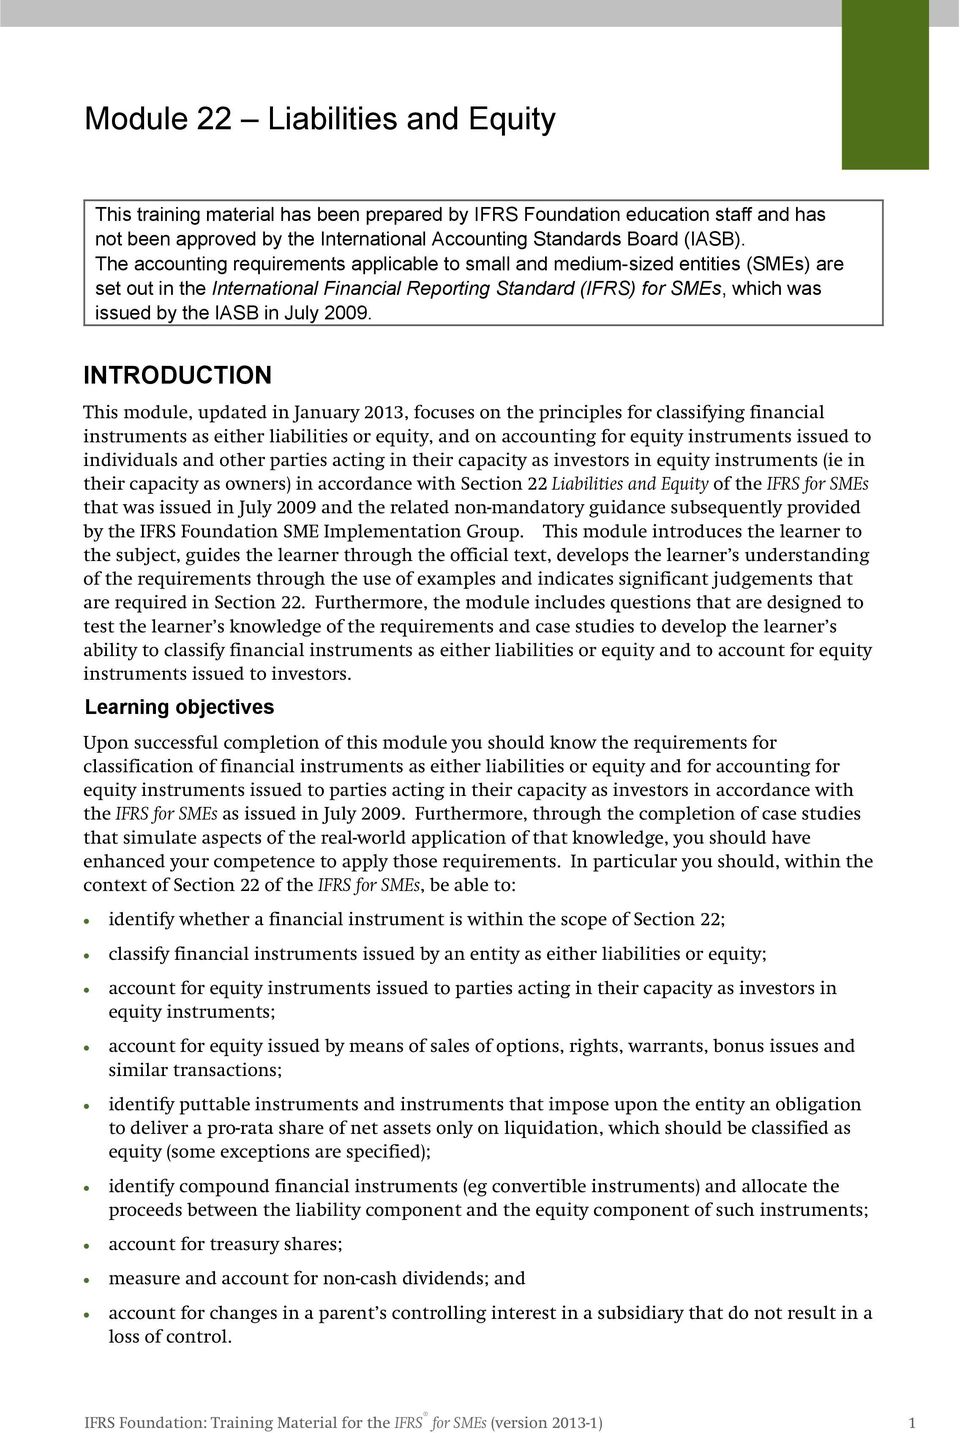 2009. INTRODUCTION This module, updated in January 2013, focuses on the principles for classifying financial instruments as either liabilities or equity, and on accounting for equity instruments